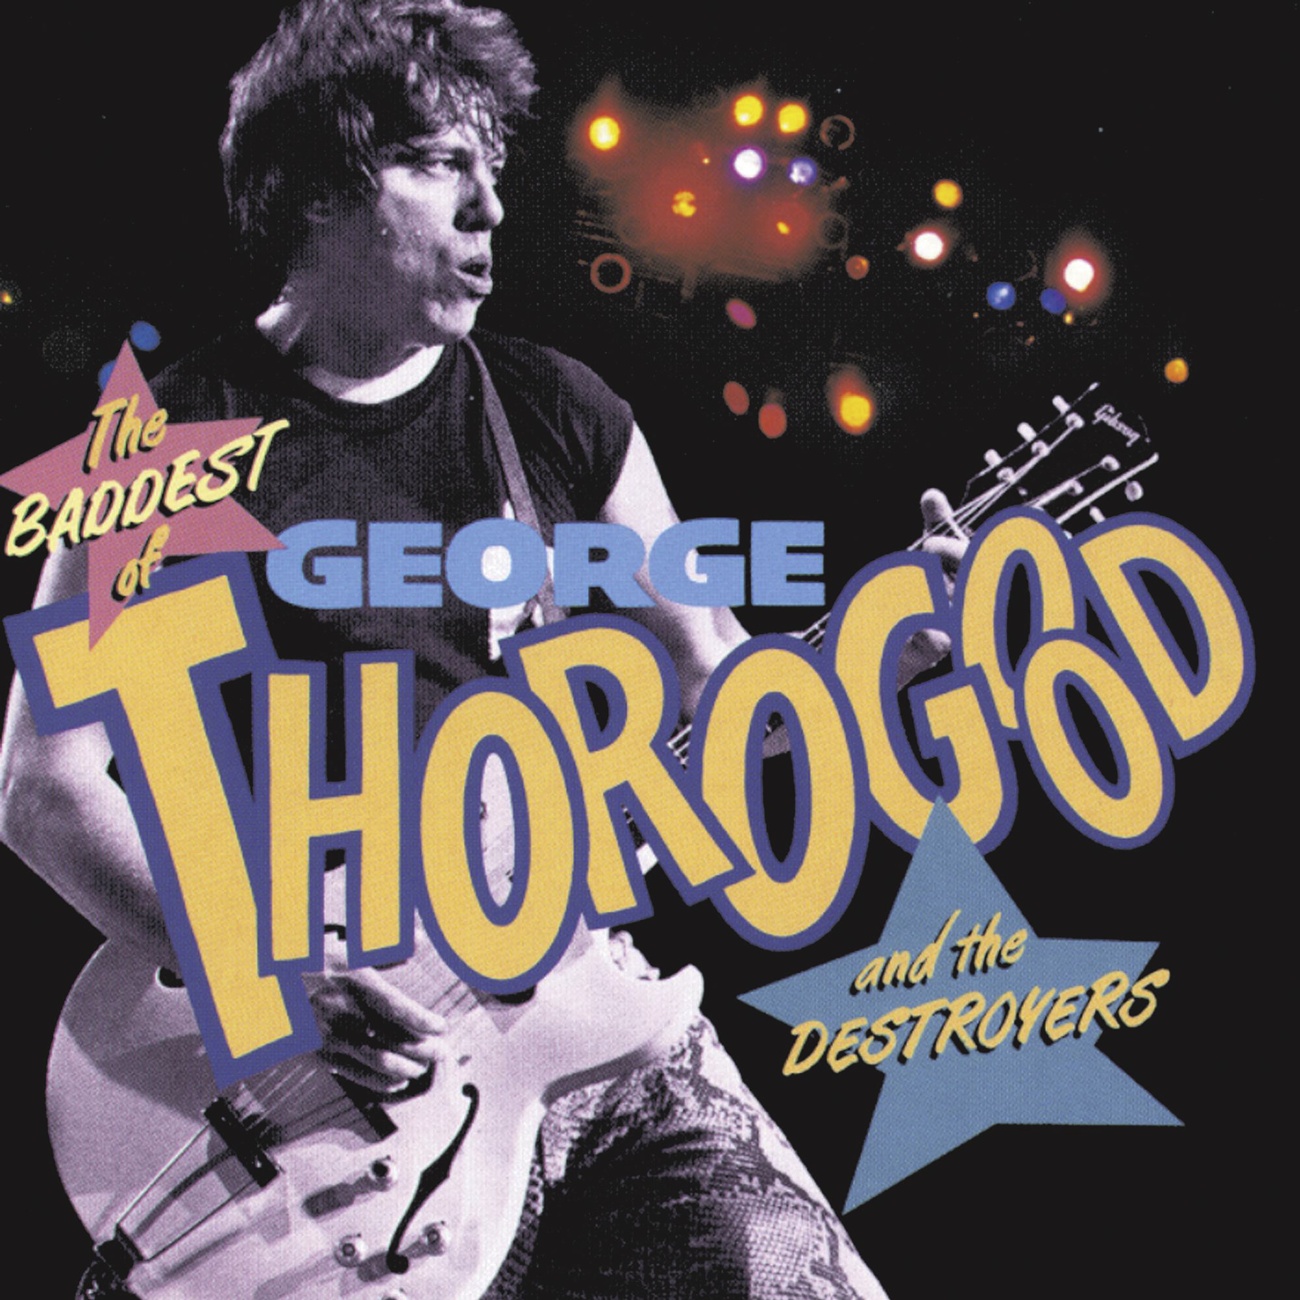 The Baddest Of George Thorogood And The Destroyers